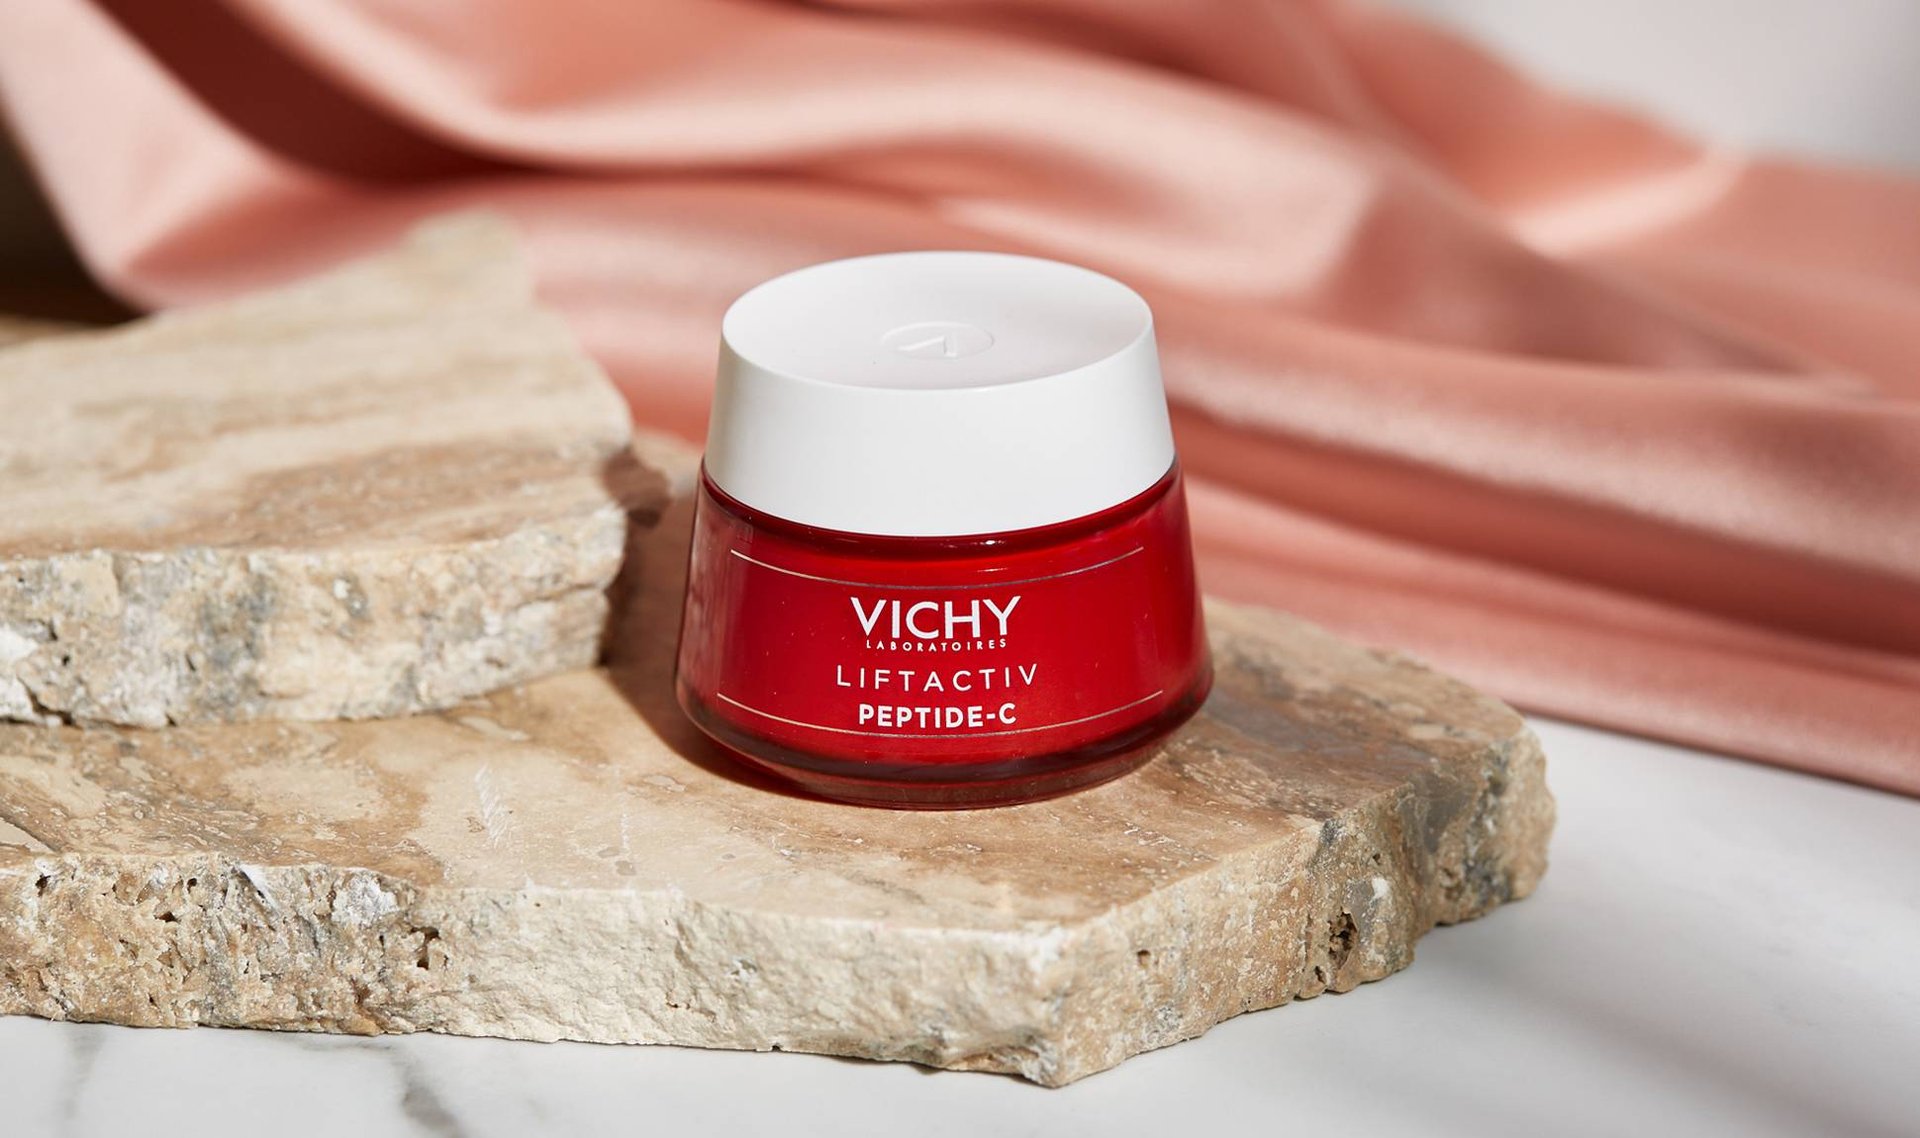 What Happened When I Added the Vichy Peptide-C Moisturizer to My Morning Skin-Care Routine